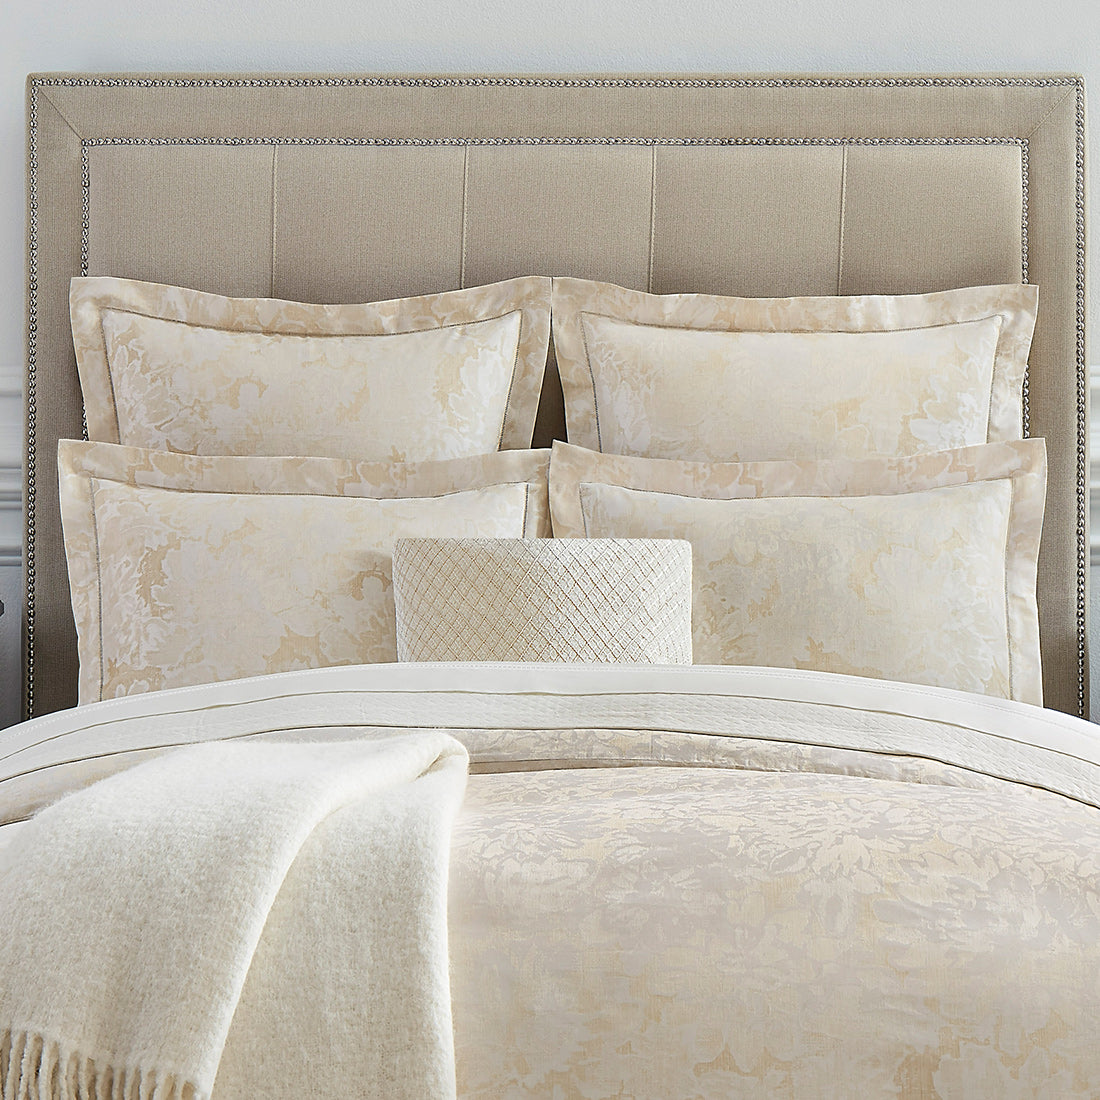 Fall/Winter 2020 Collection | New Arrivals in Luxury Bedding | SFERRA